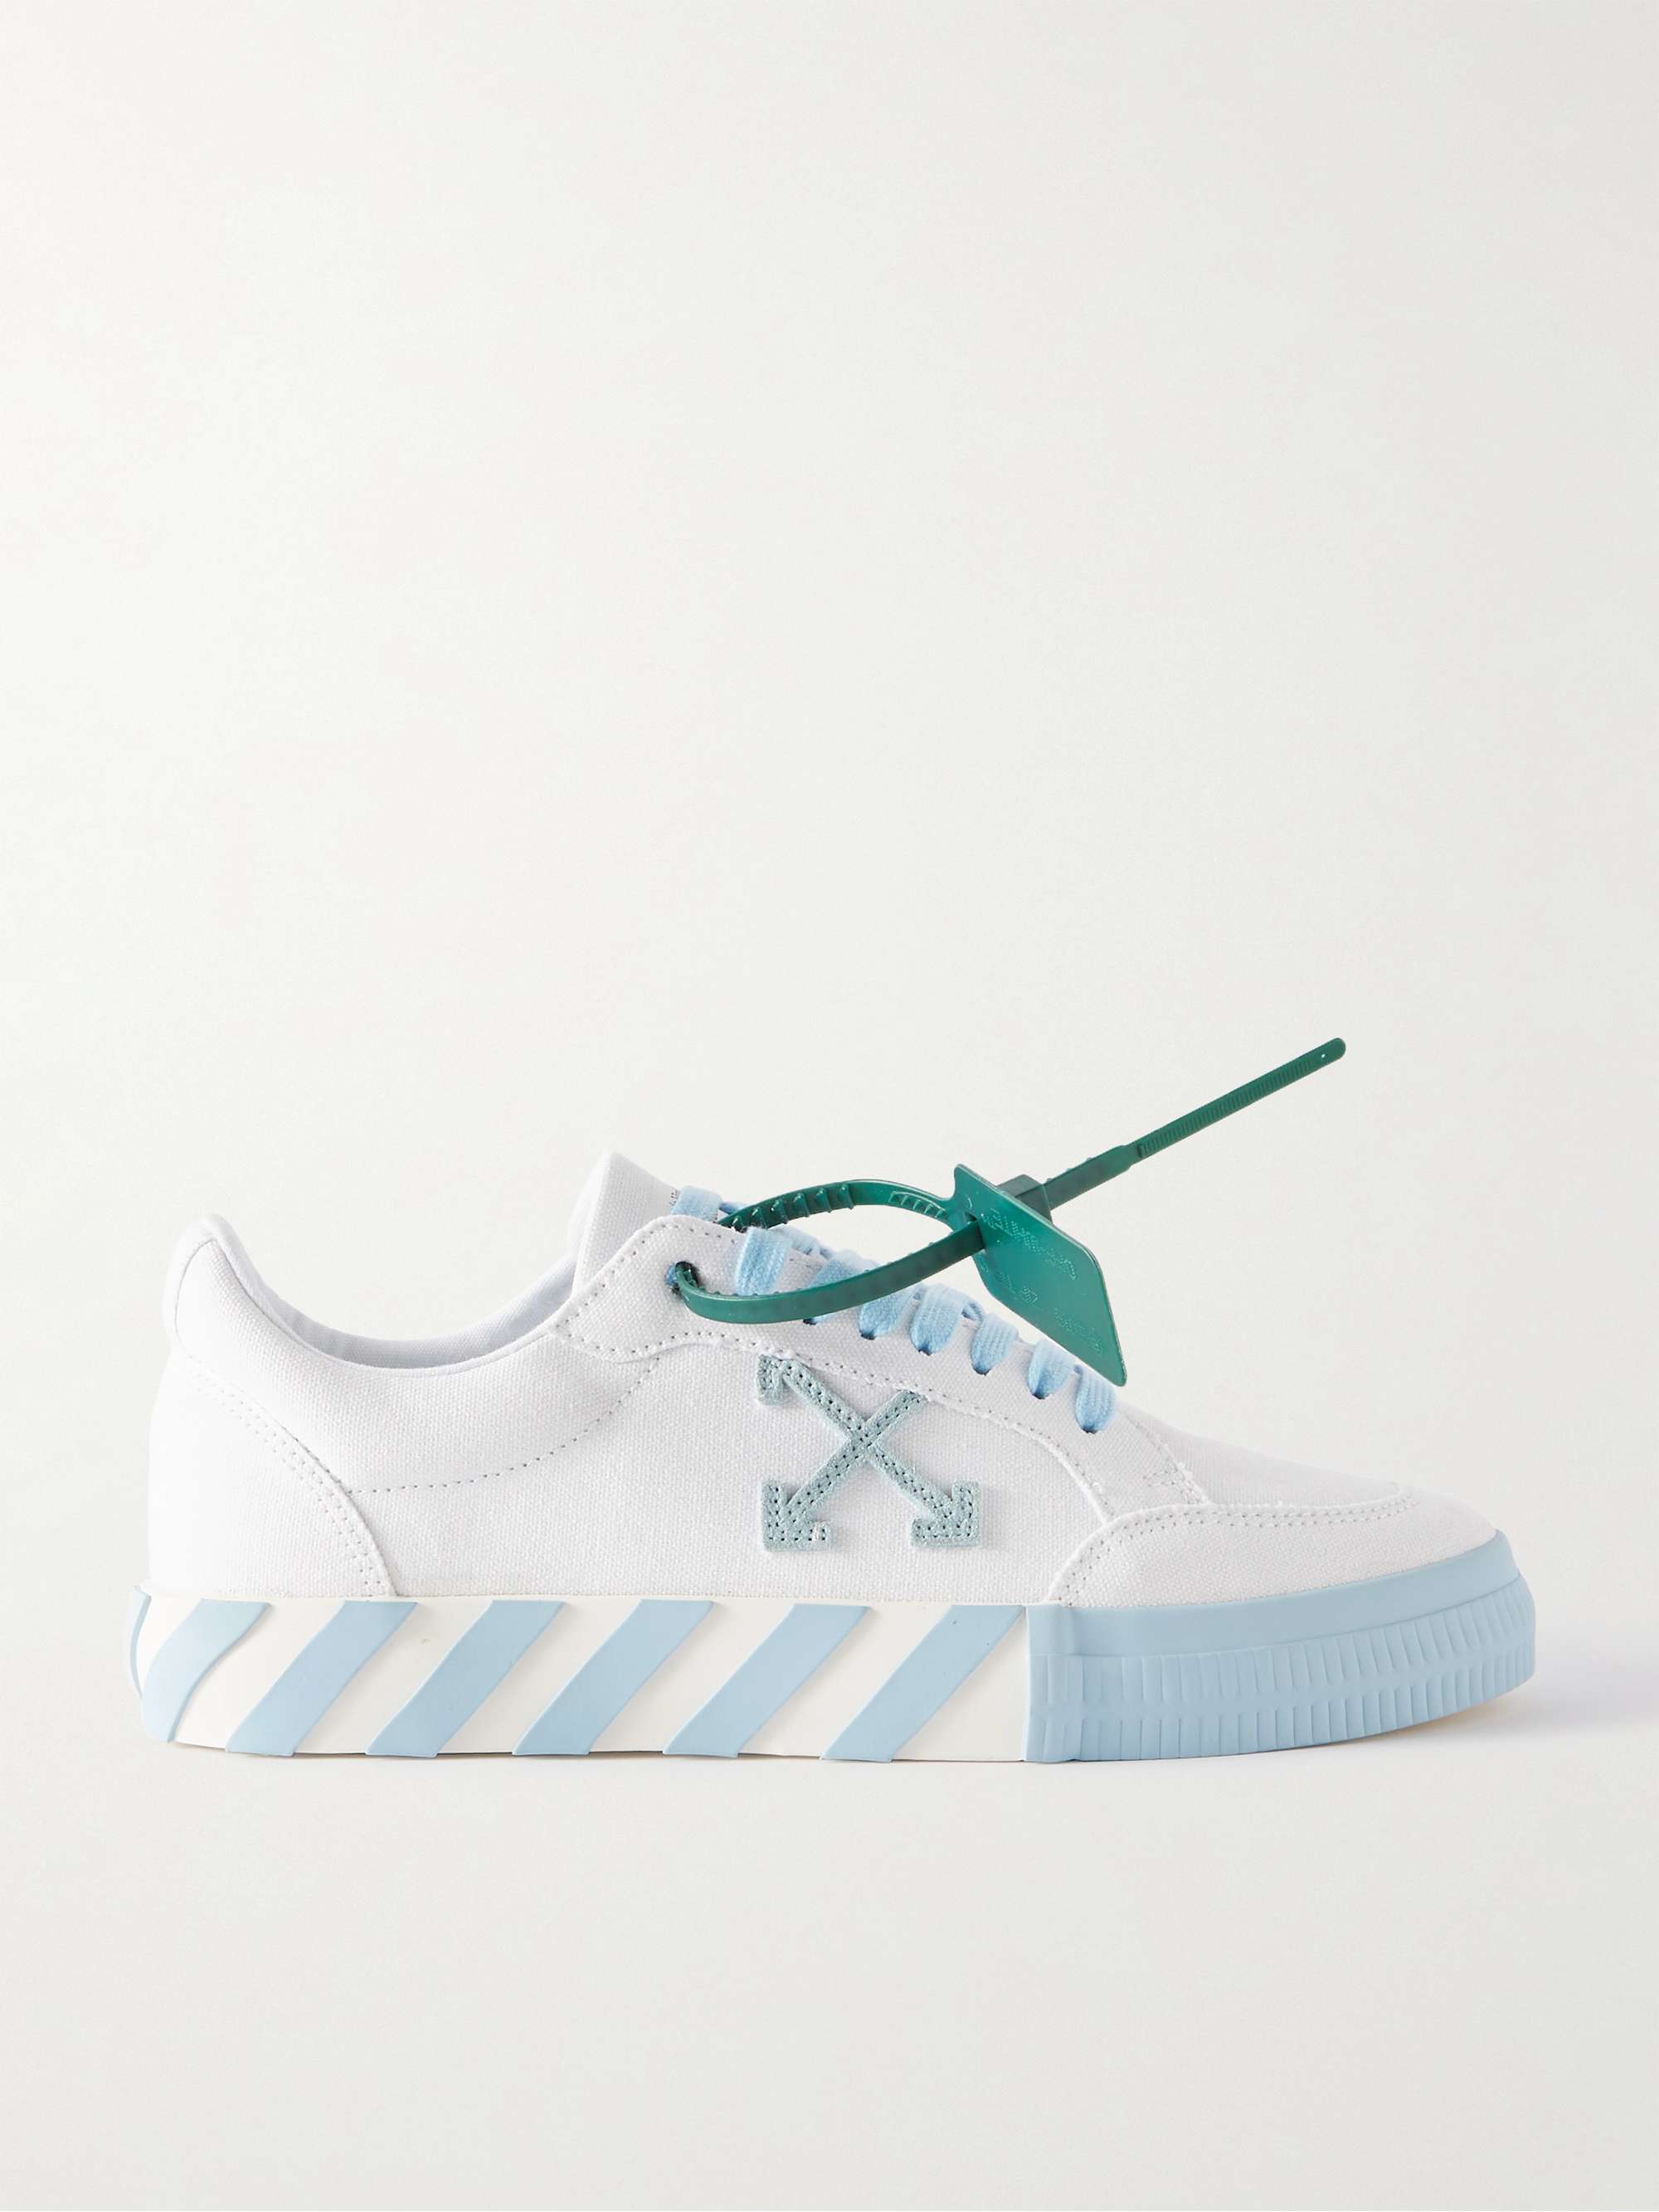 OFF-WHITE Suede-Trimmed Canvas Sneakers | MR PORTER